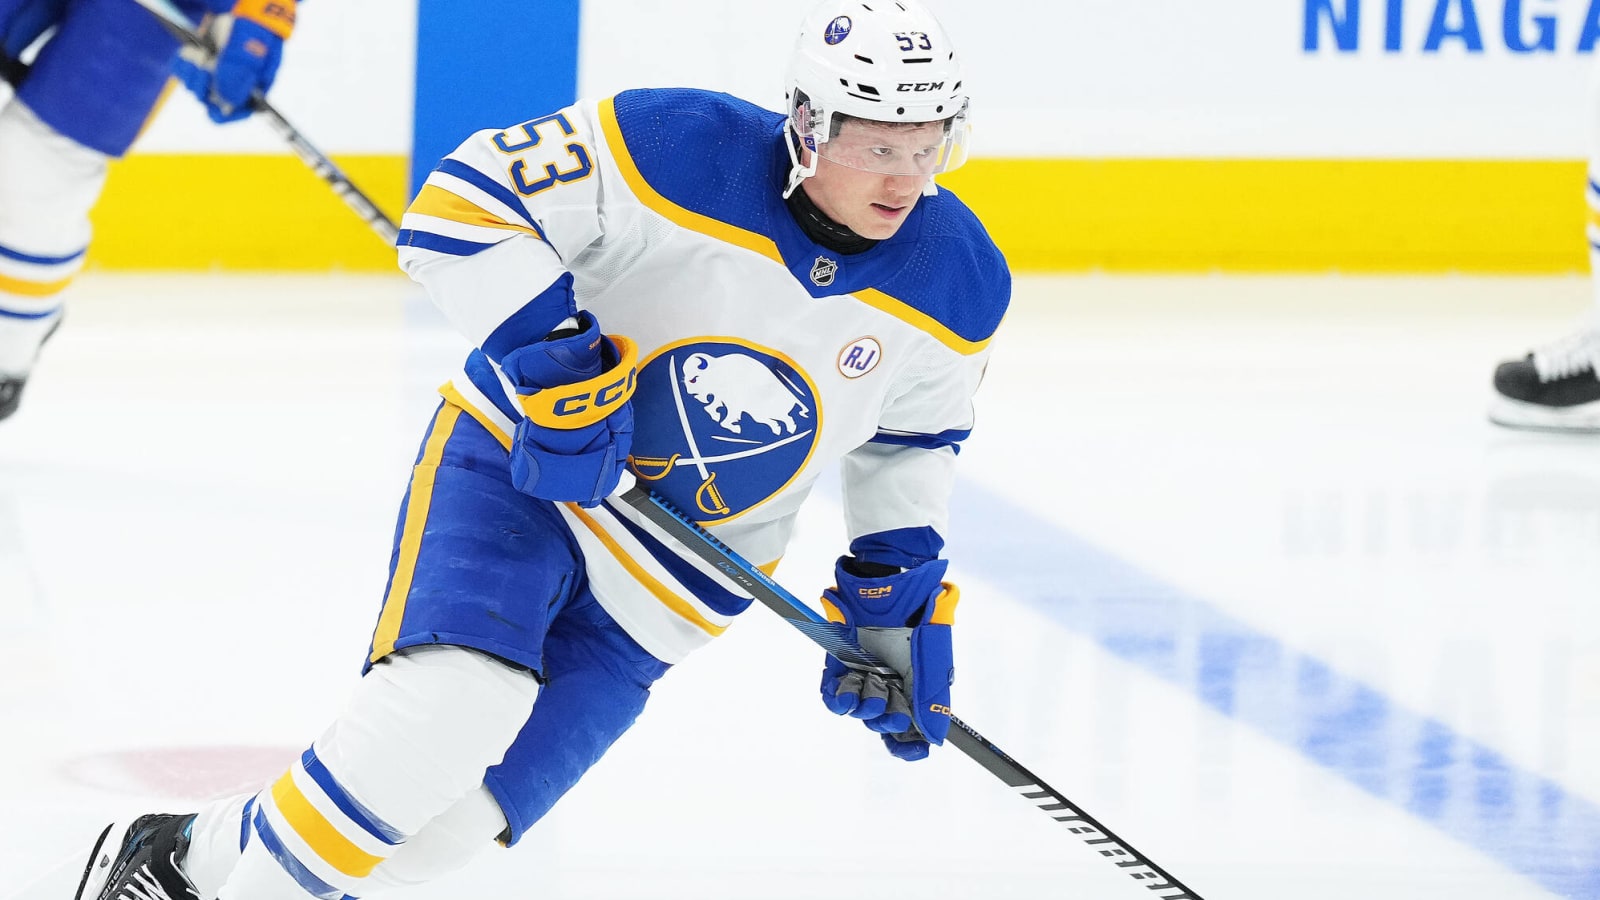 Sabres Grades: Skinner Leads Way With Hat Trick